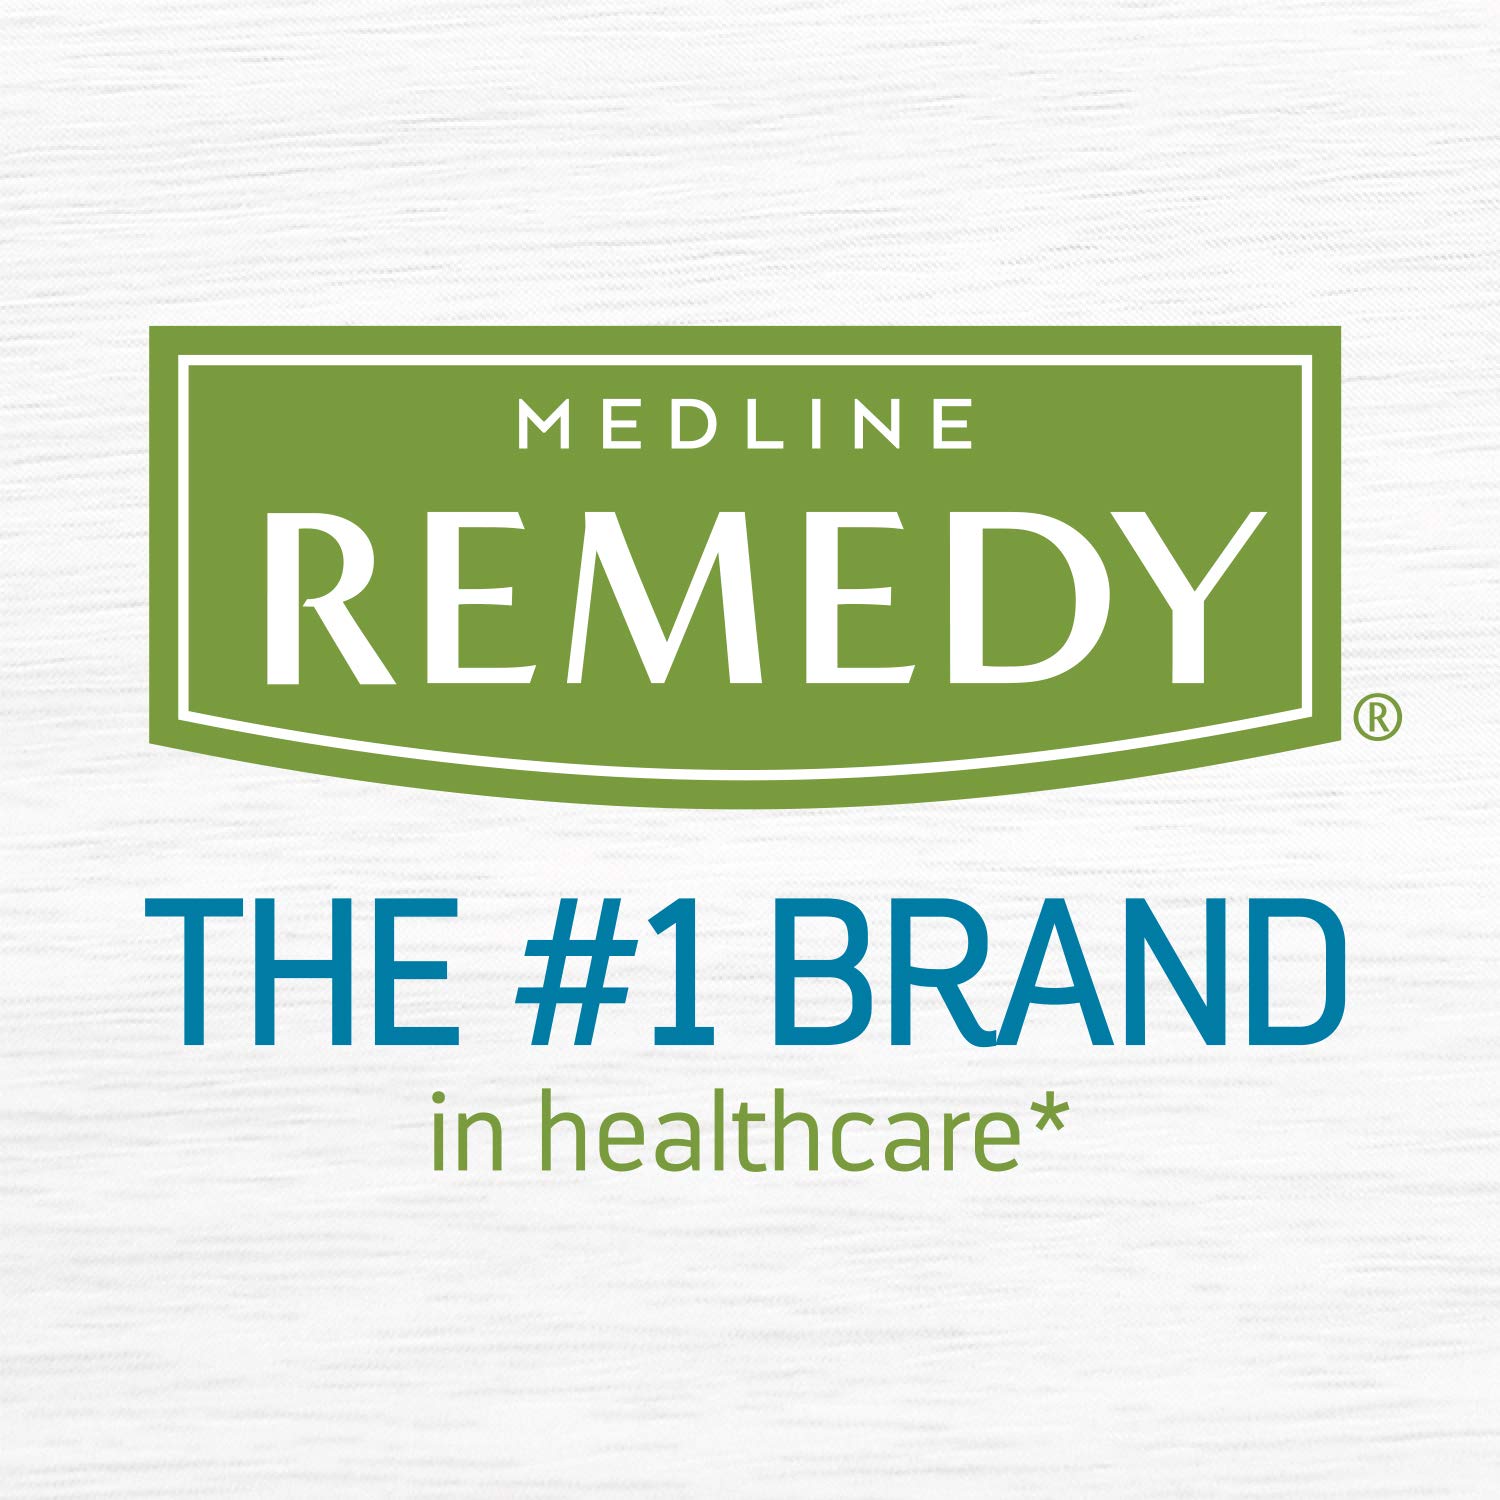 Medline Remedy Unscented Olivamine Skin Repair Cream and Body Lotion, 32 Fluid Ounce